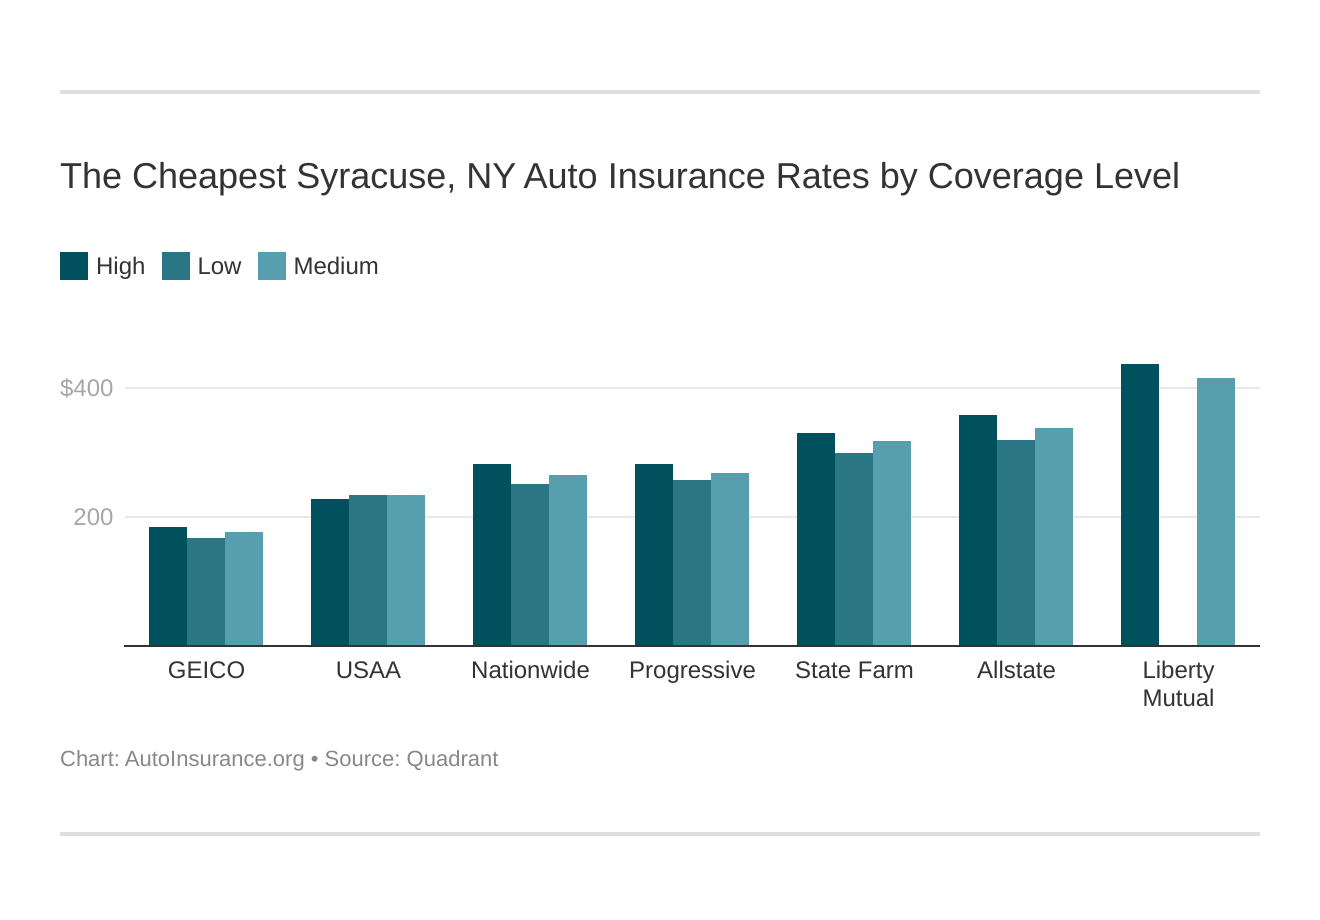 The Cheapest Syracuse, NY Auto Insurance Rates by Coverage Level